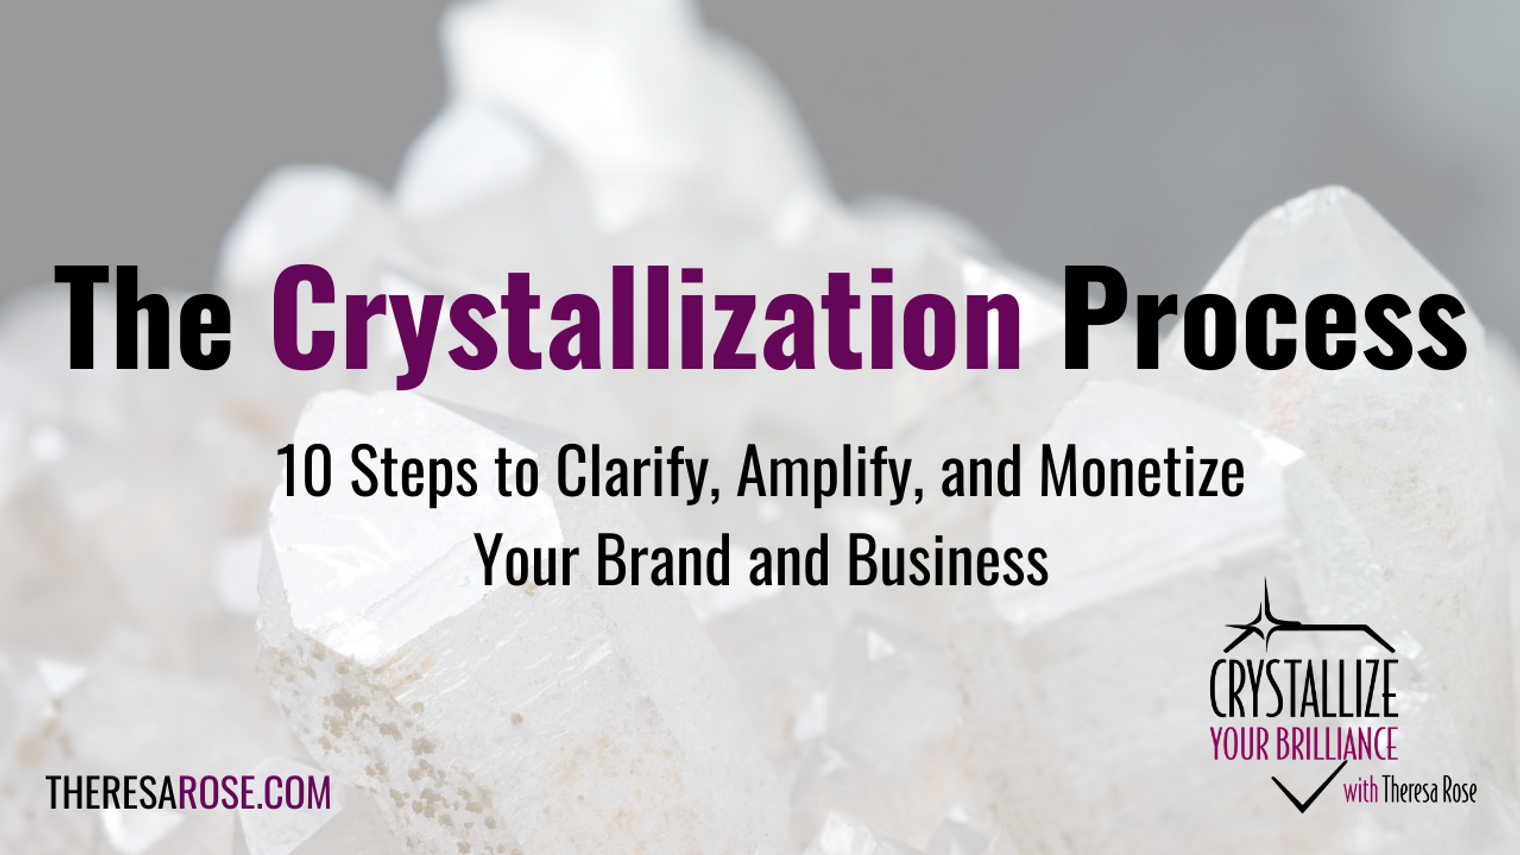 The Crystallization Process